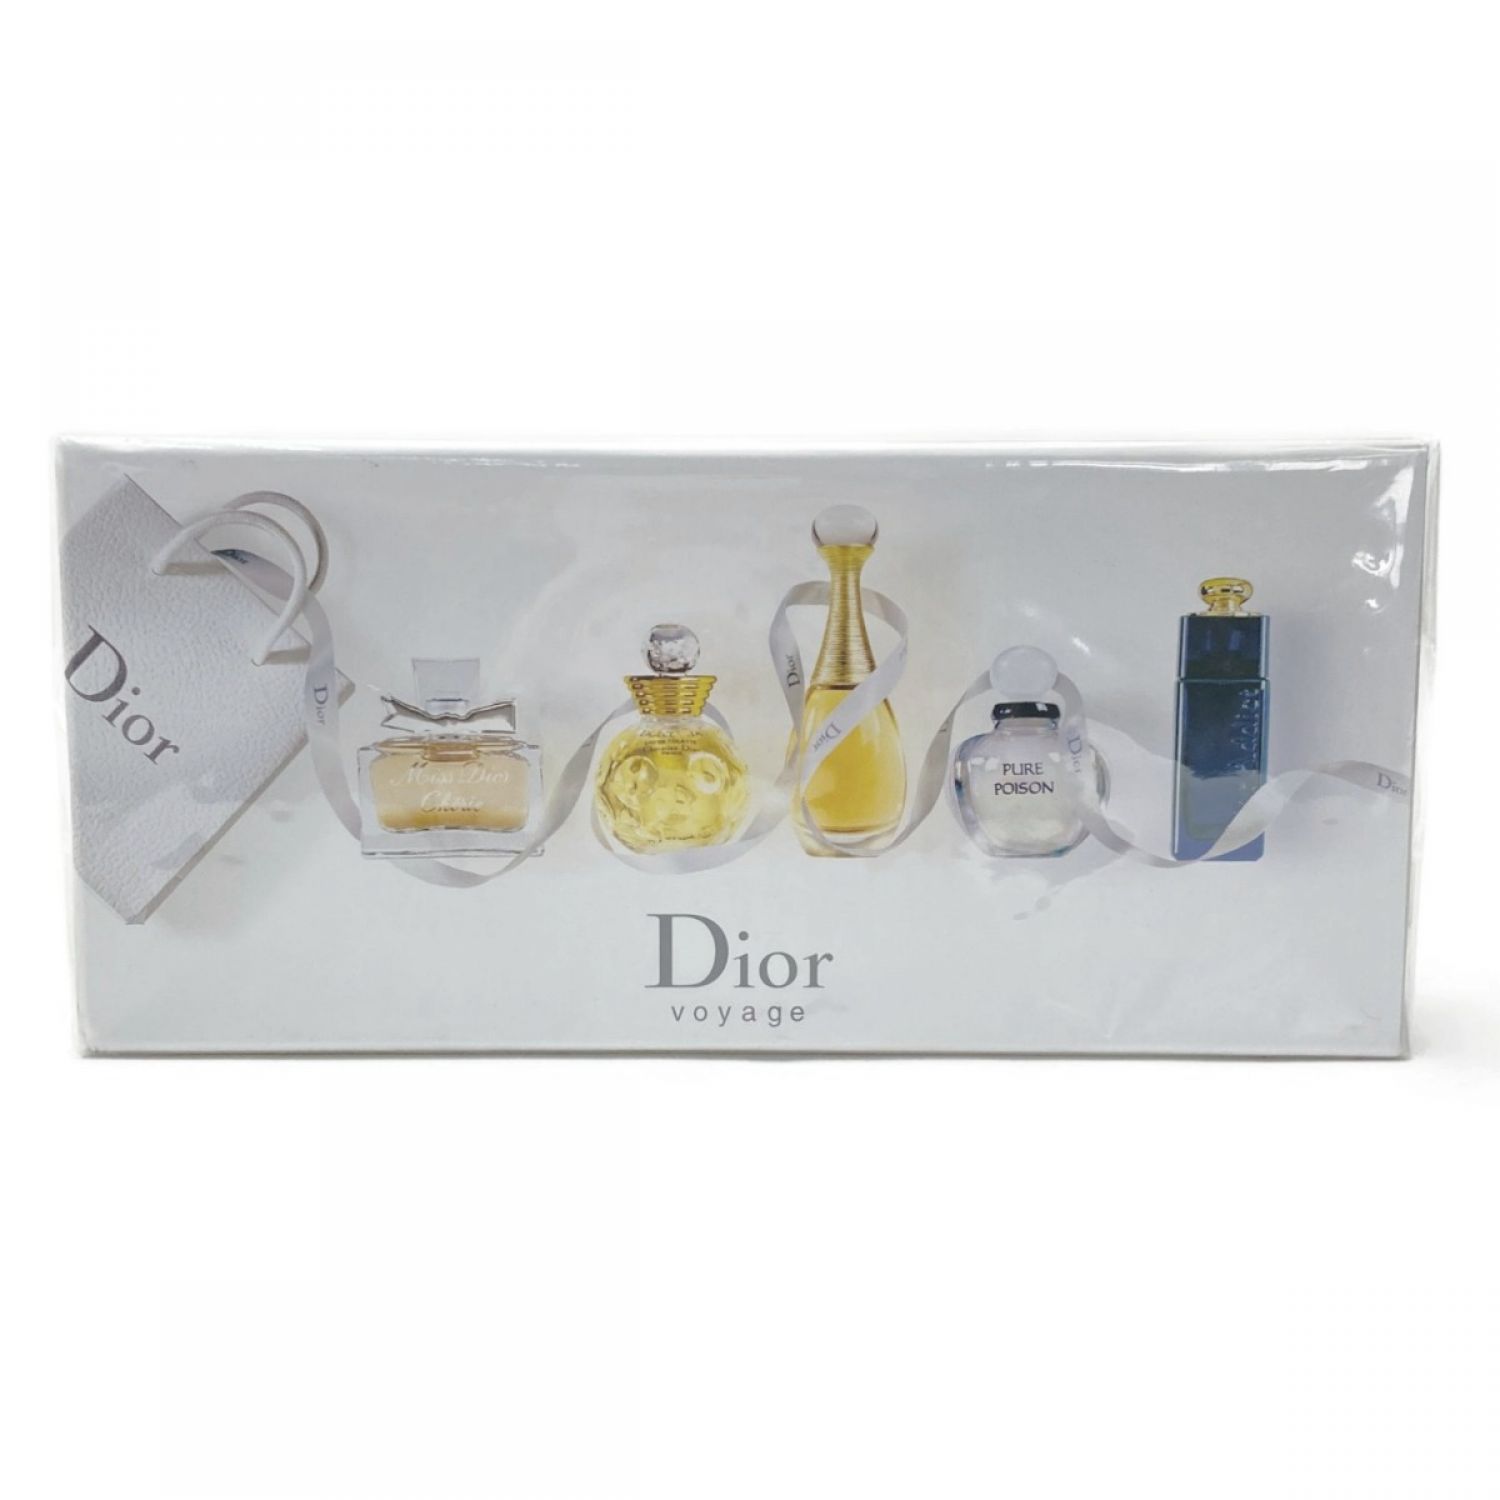 Dior ミニ香水セット LES PARFUMS-